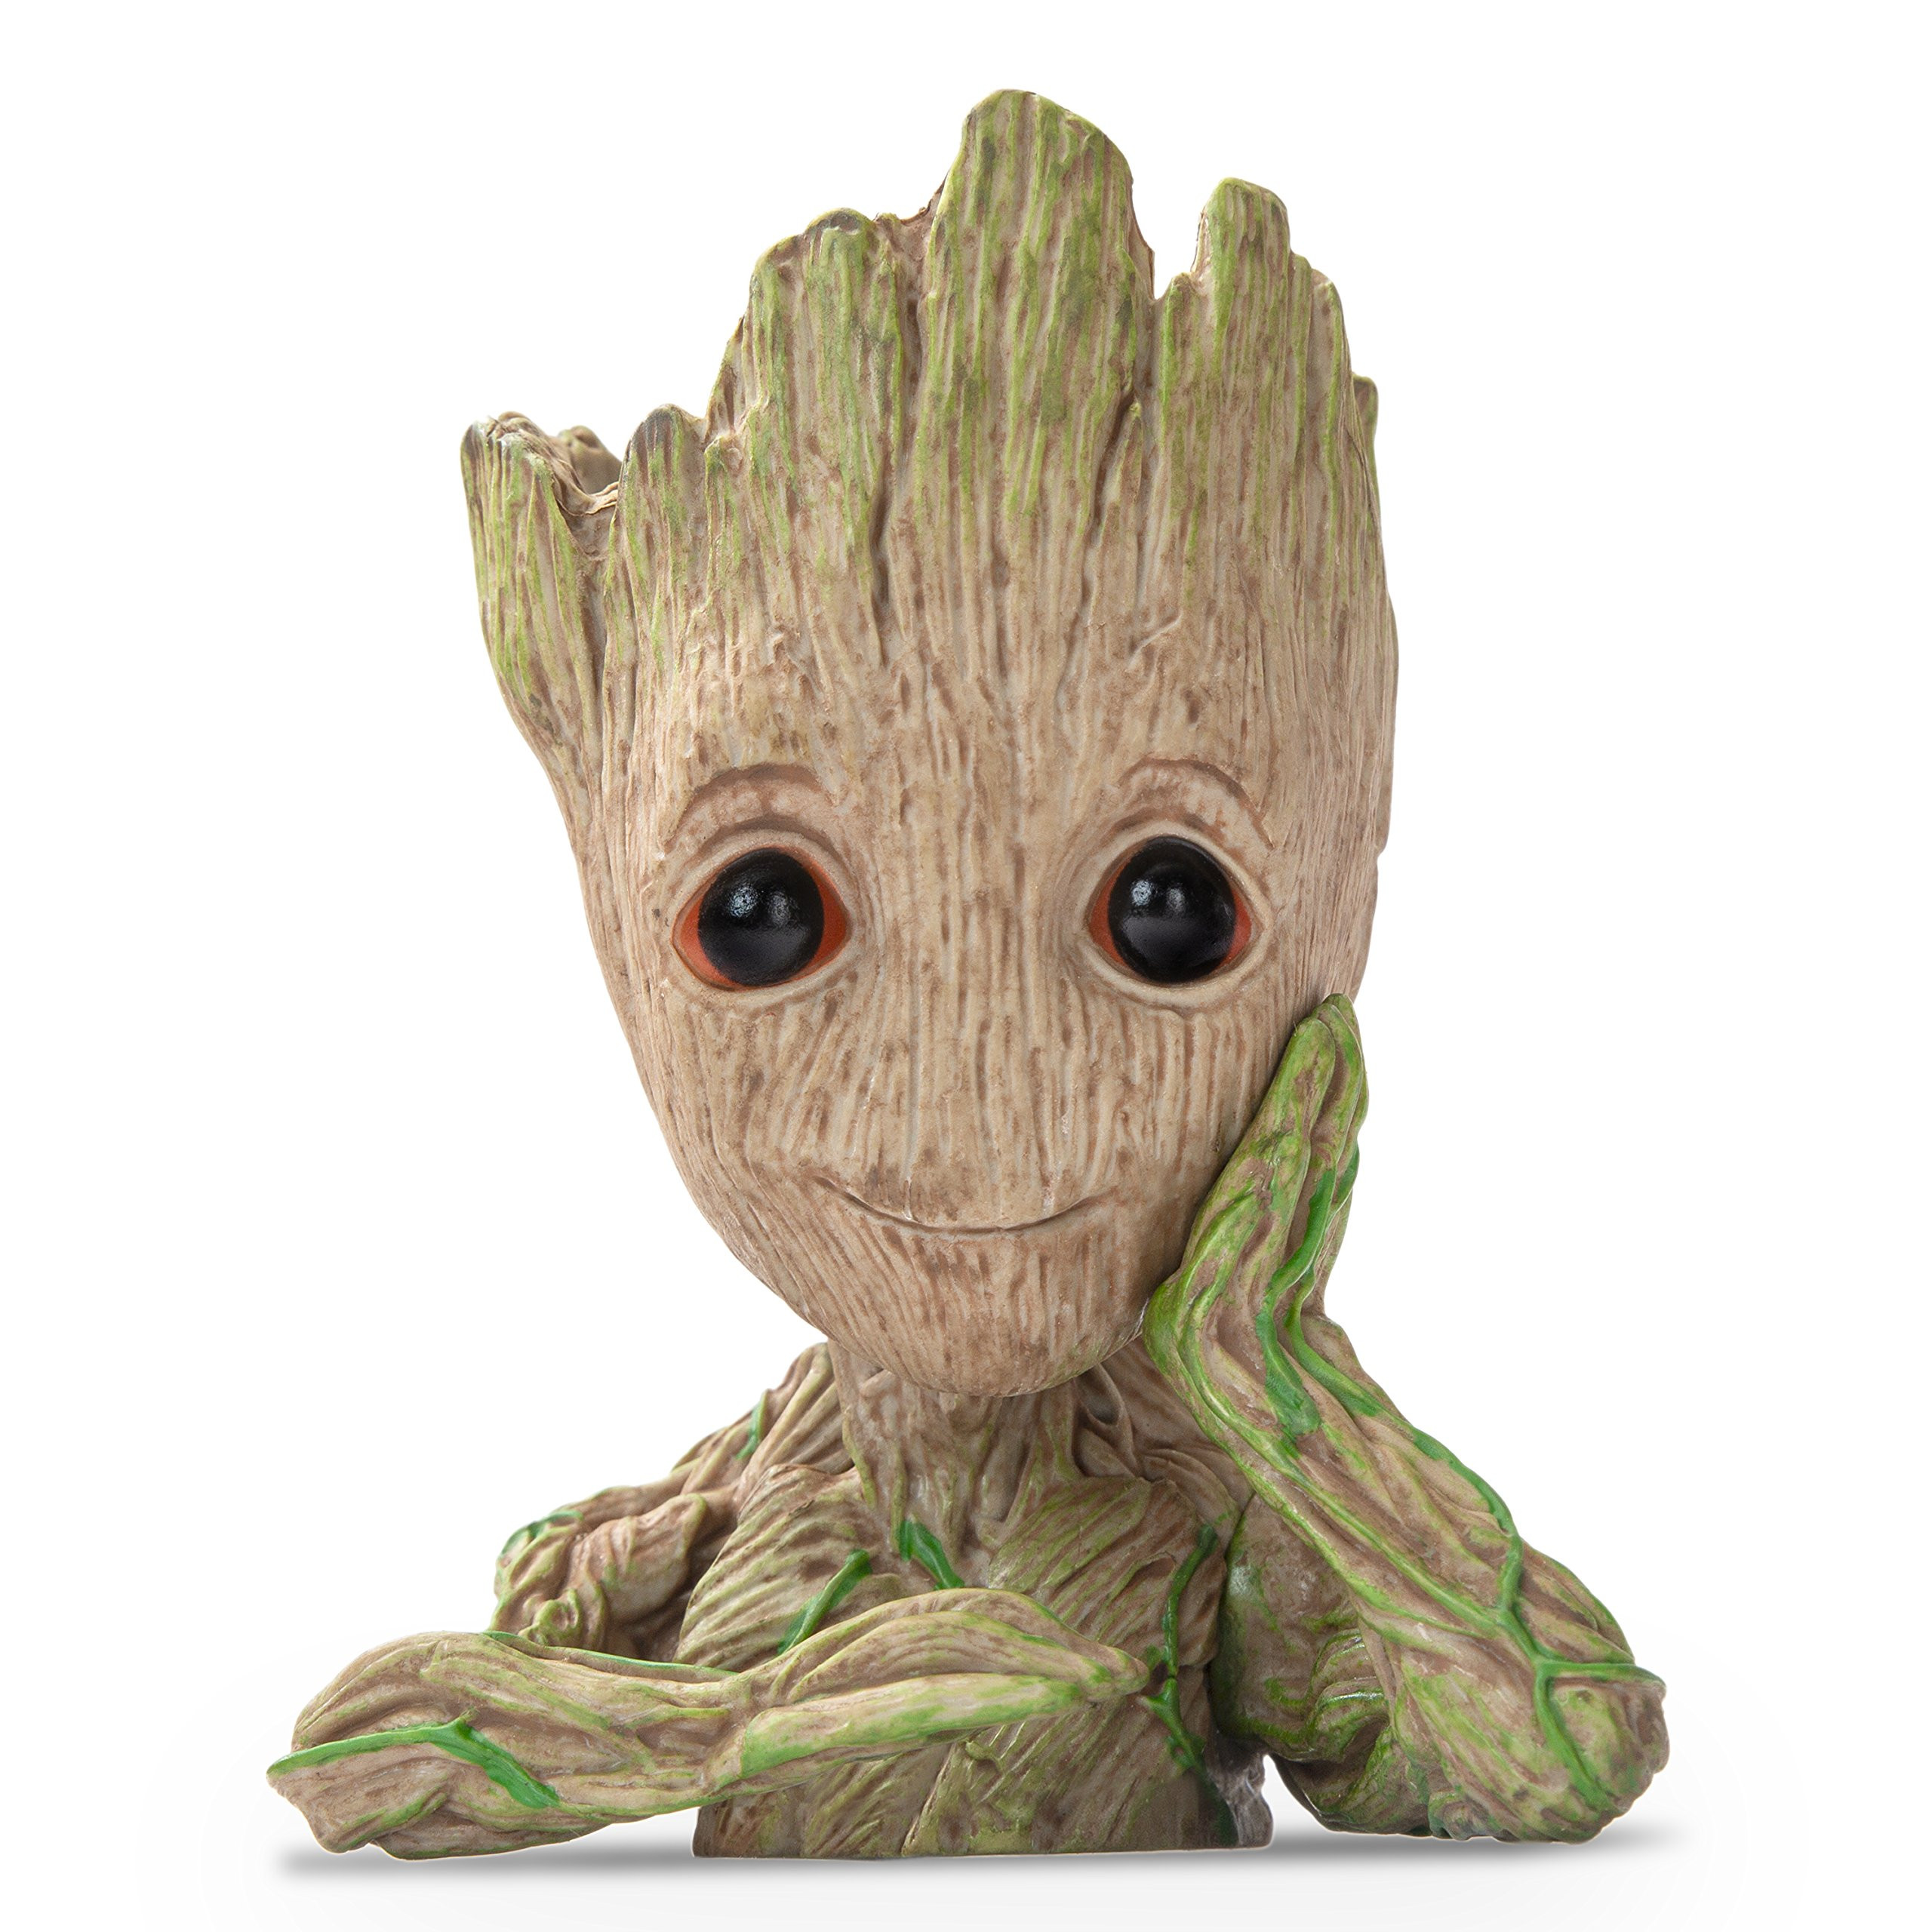 Best ideas about Baby Groot Flower Pot Amazon
. Save or Pin Greenwich Guardians of The Galaxy Baby Groot Flower Pot Now.